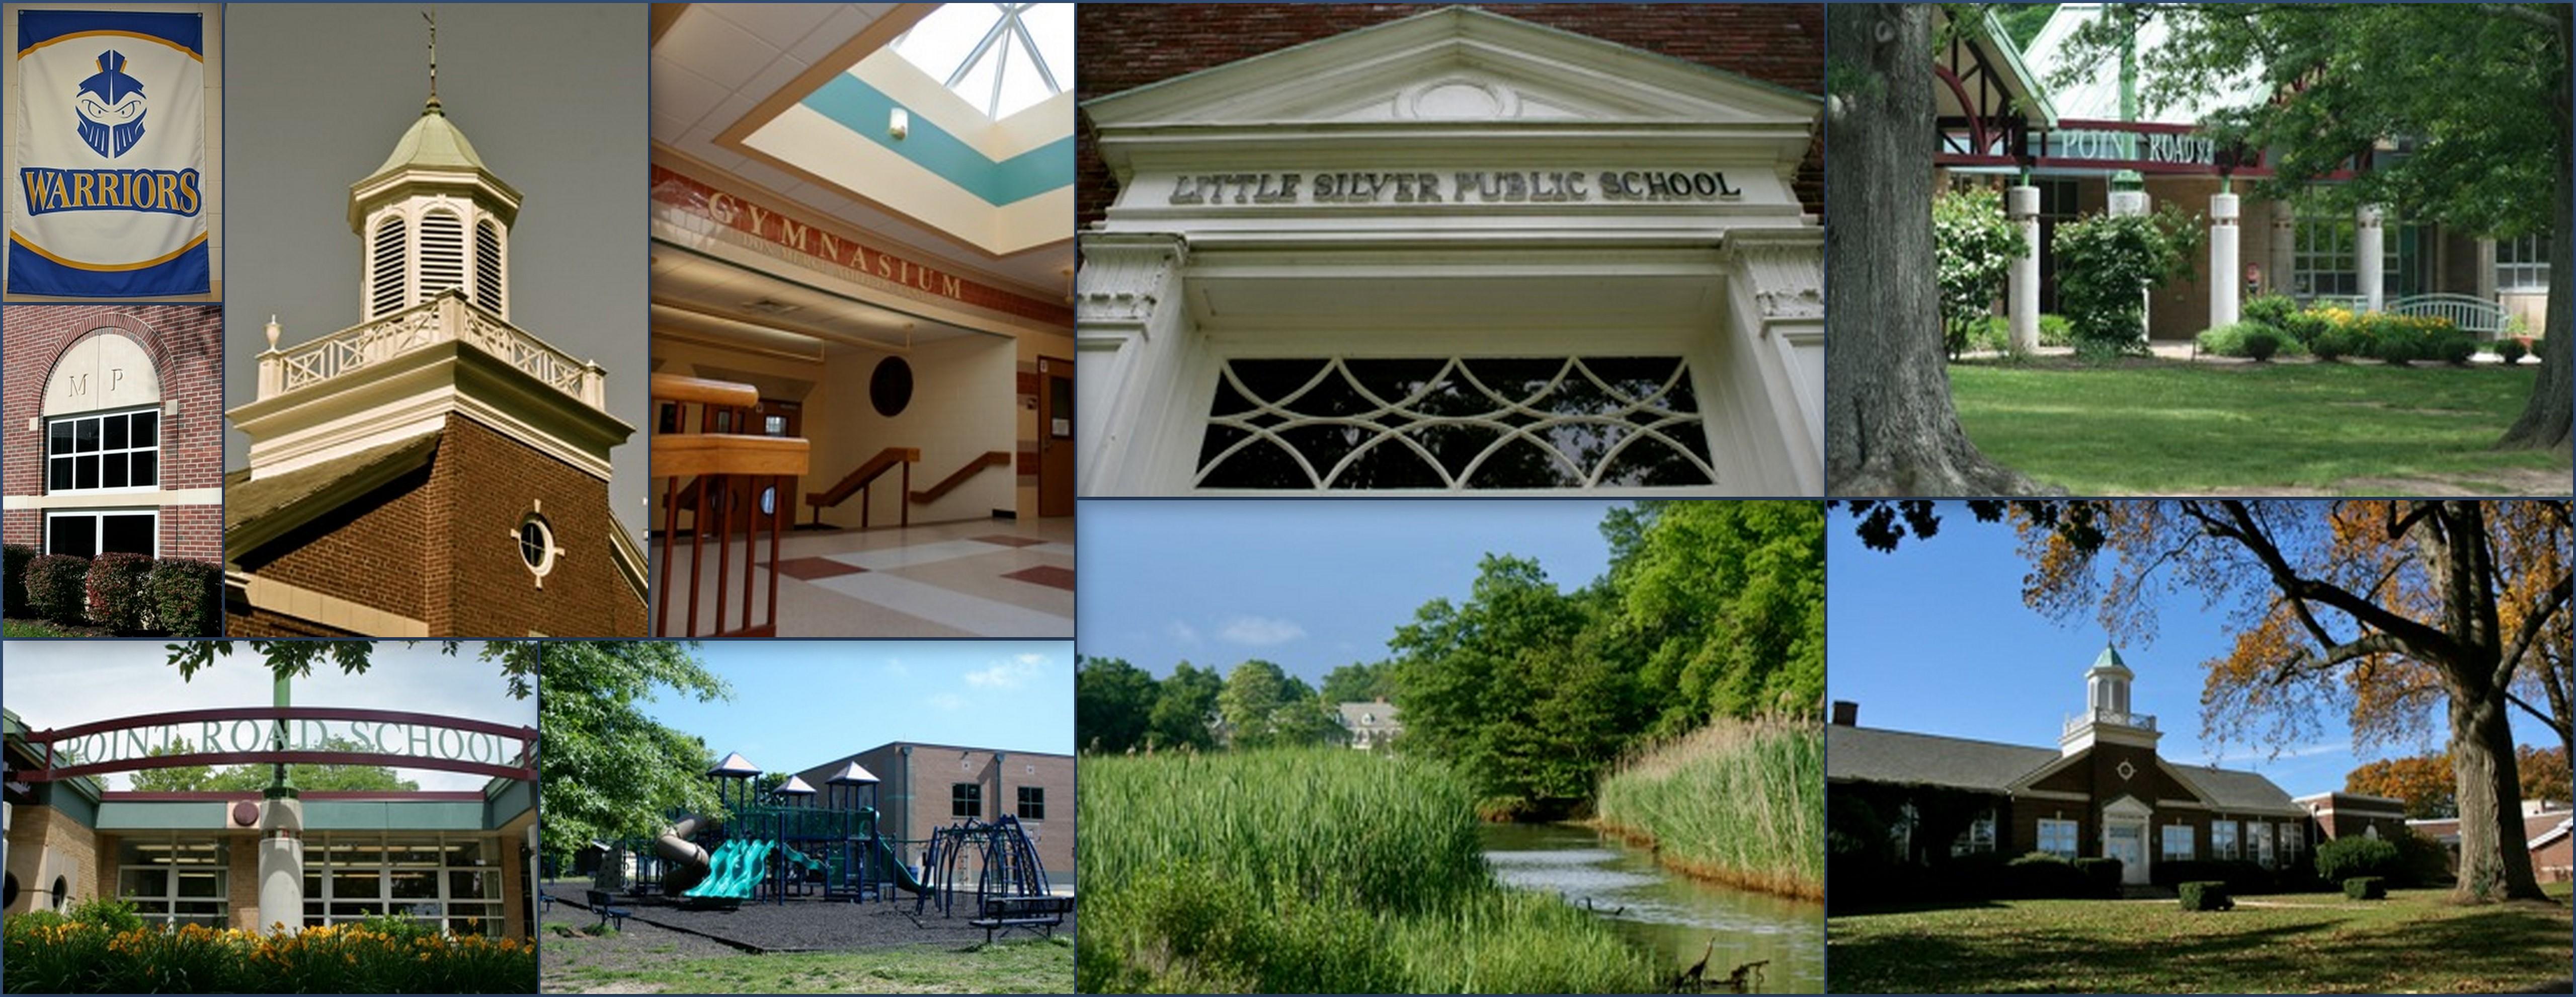 collage of the school buildings and interior